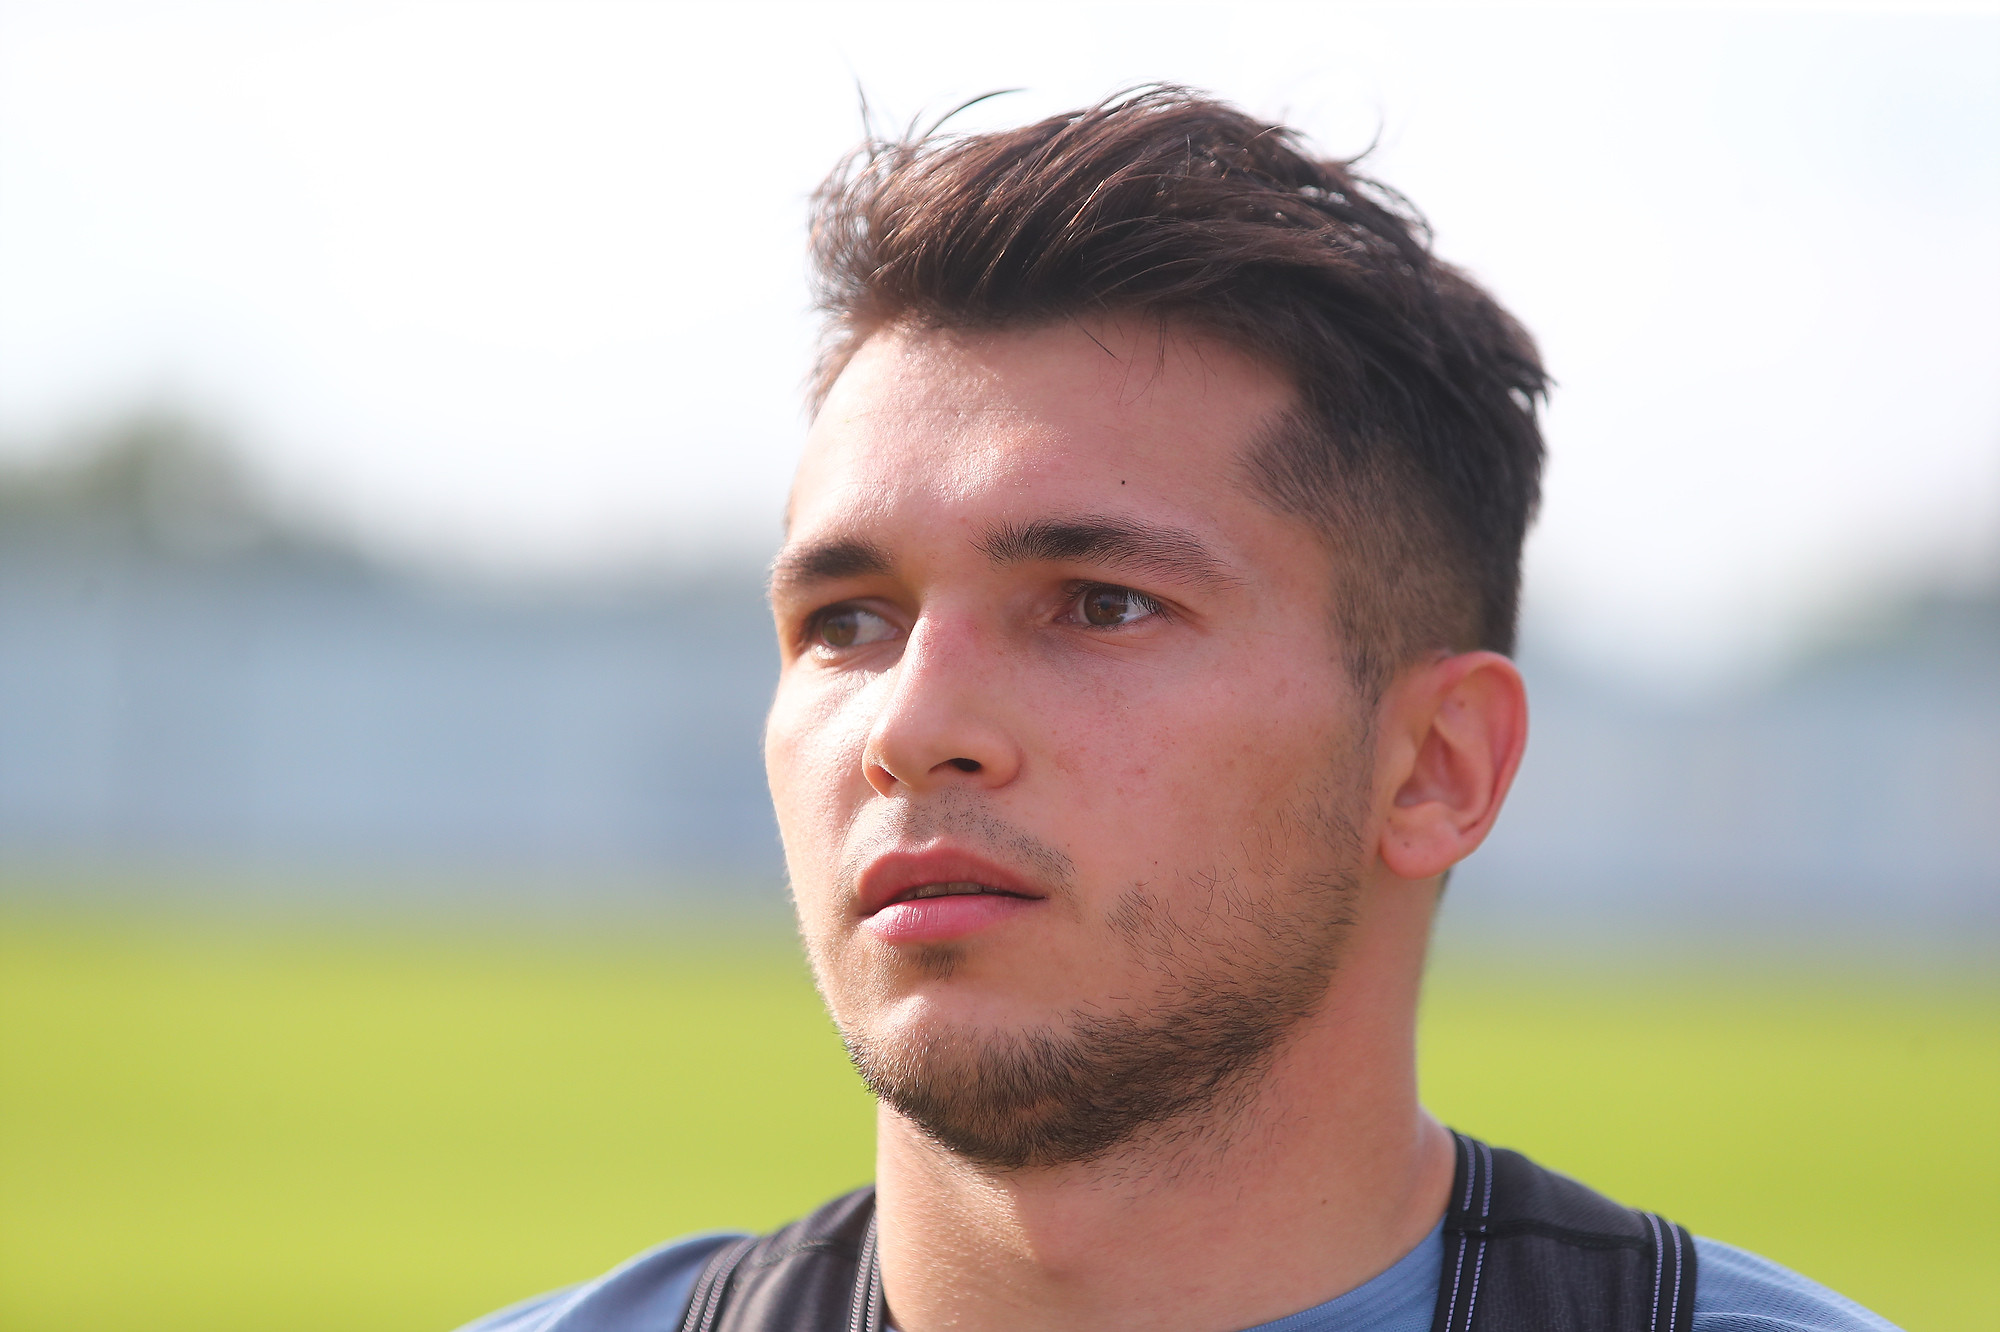 Vladyslav Dubinchak: “I’ll do my best to play for the first team”